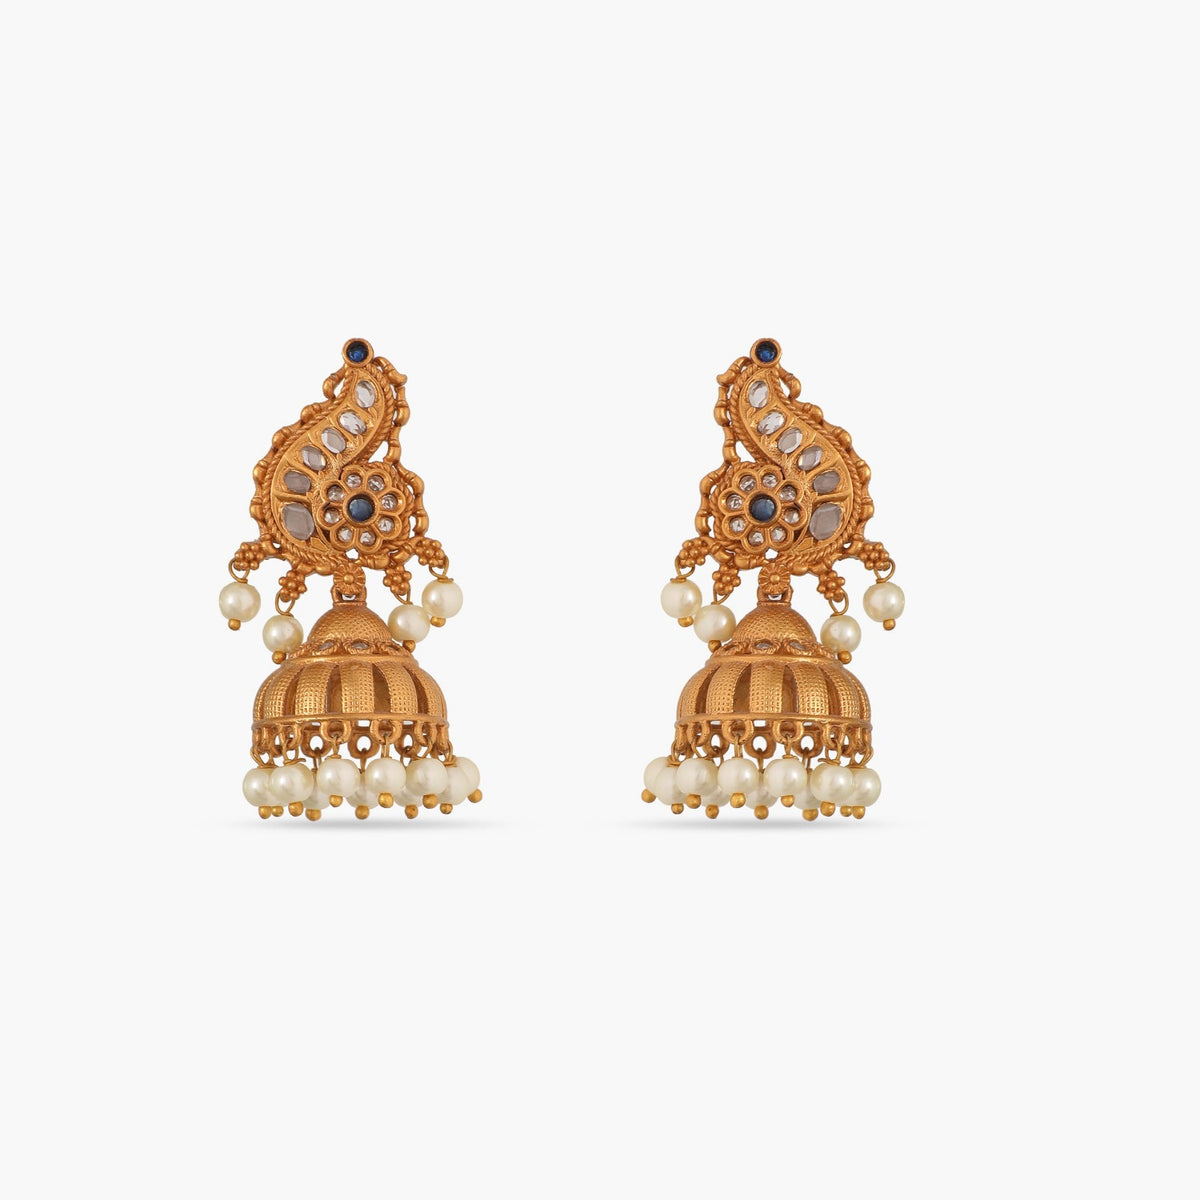 Antique Earrings AEX0183X